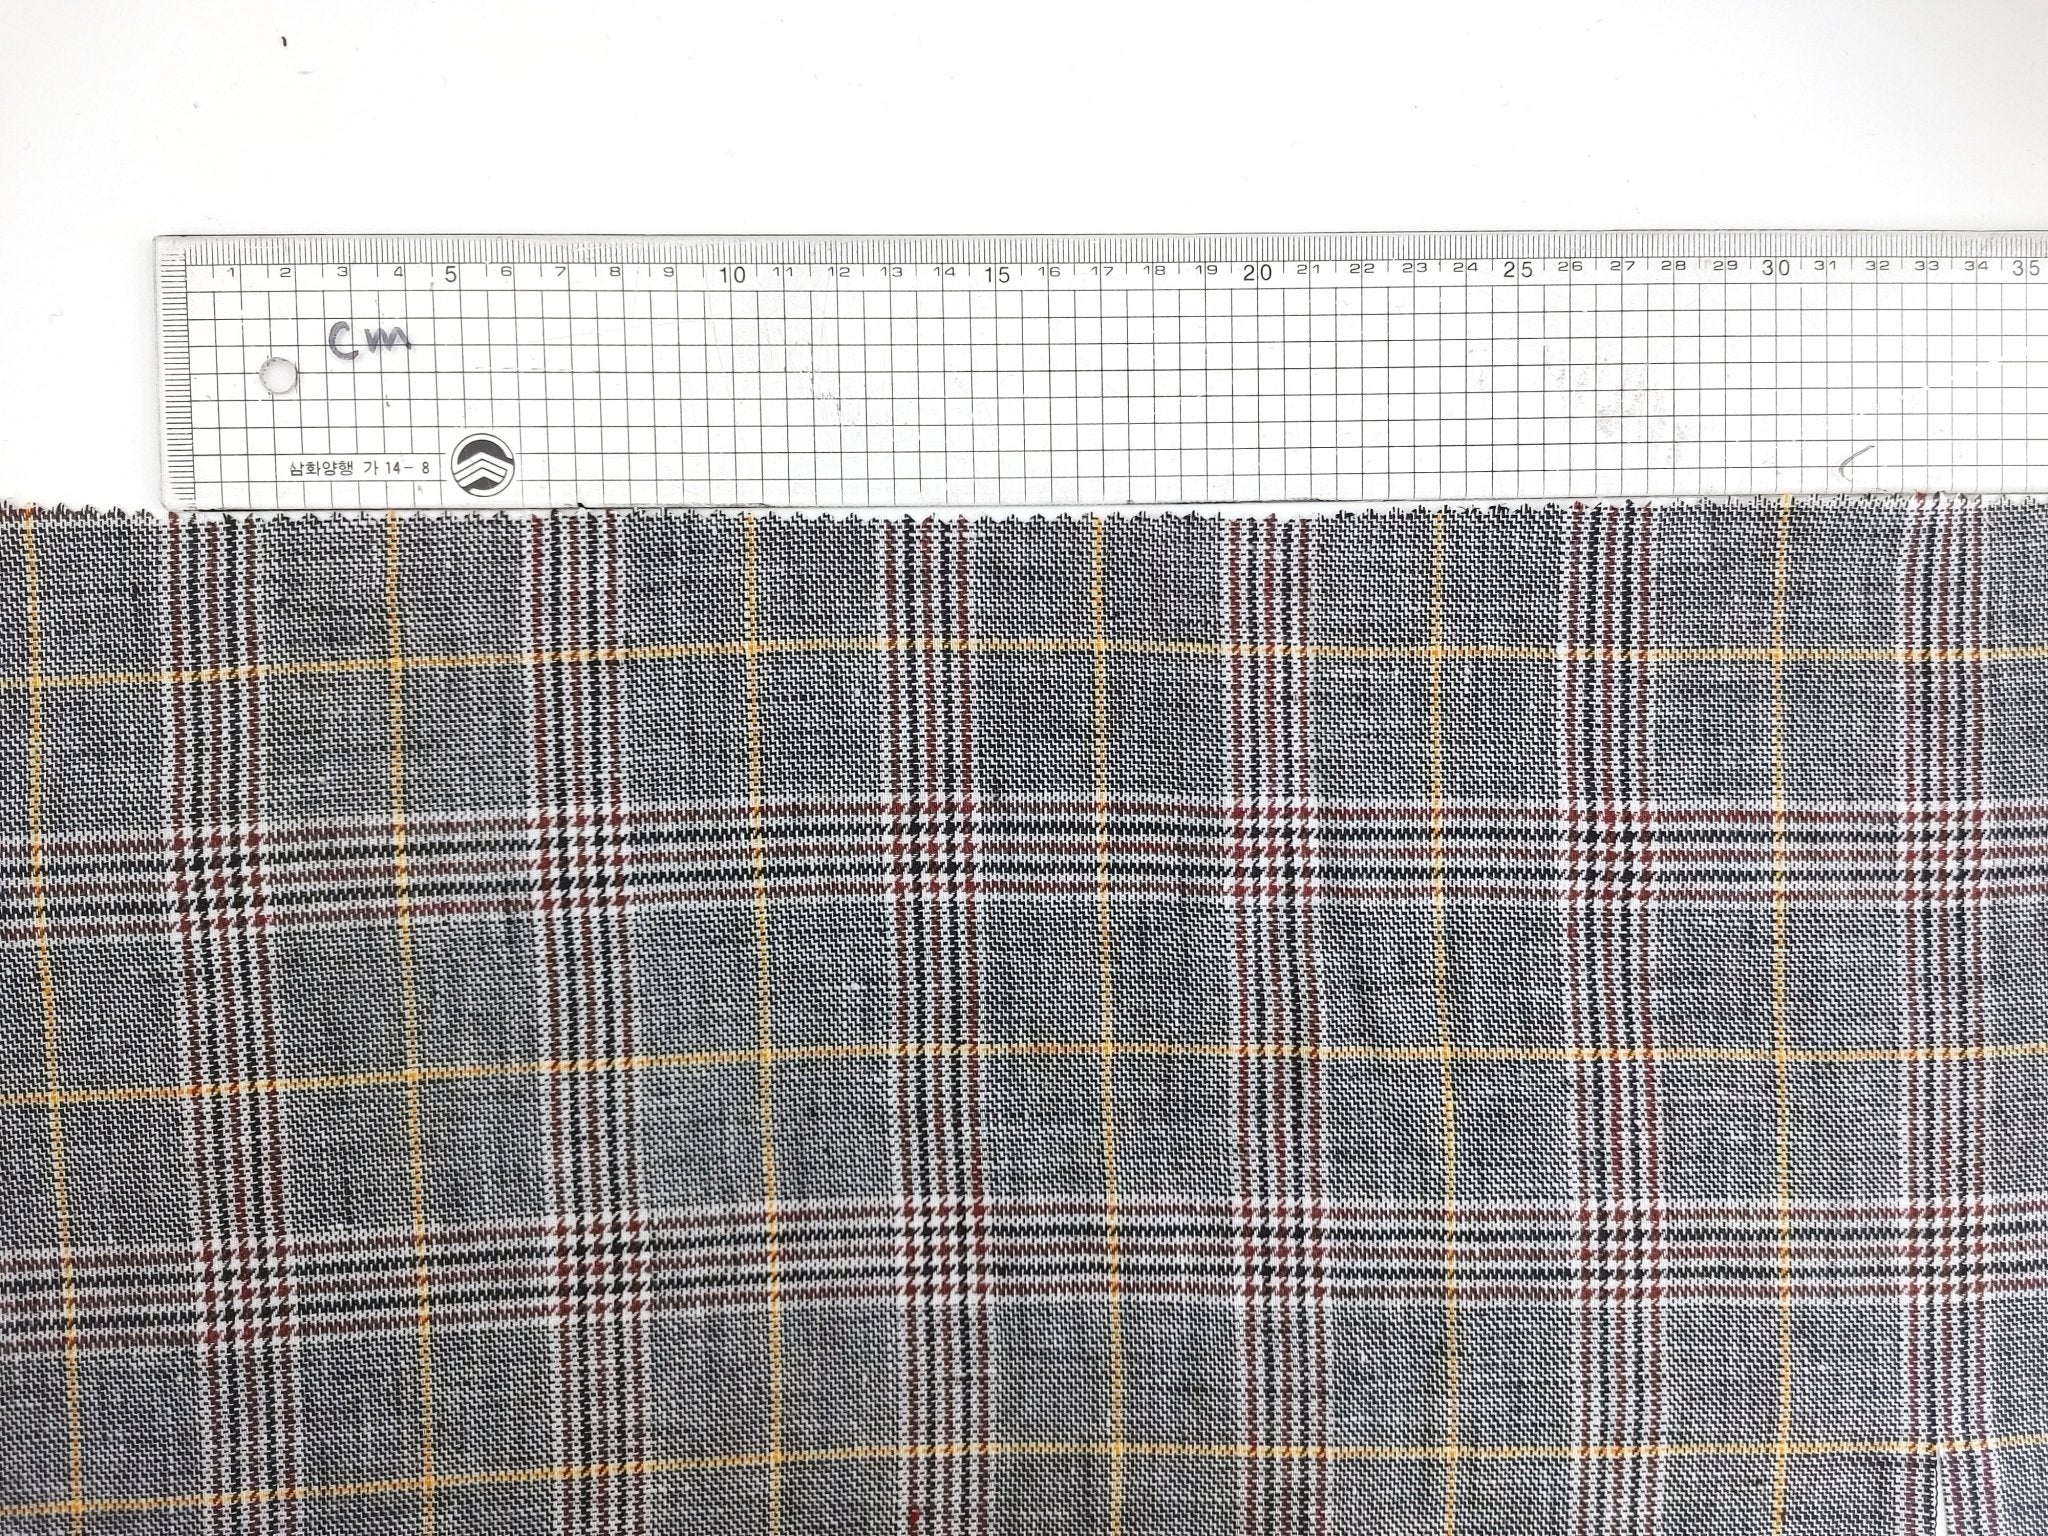 100% Linen Glen Plaid with Yellow Windowpane – White, Black, and Brown Harmony 6715 - The Linen Lab - Yellow